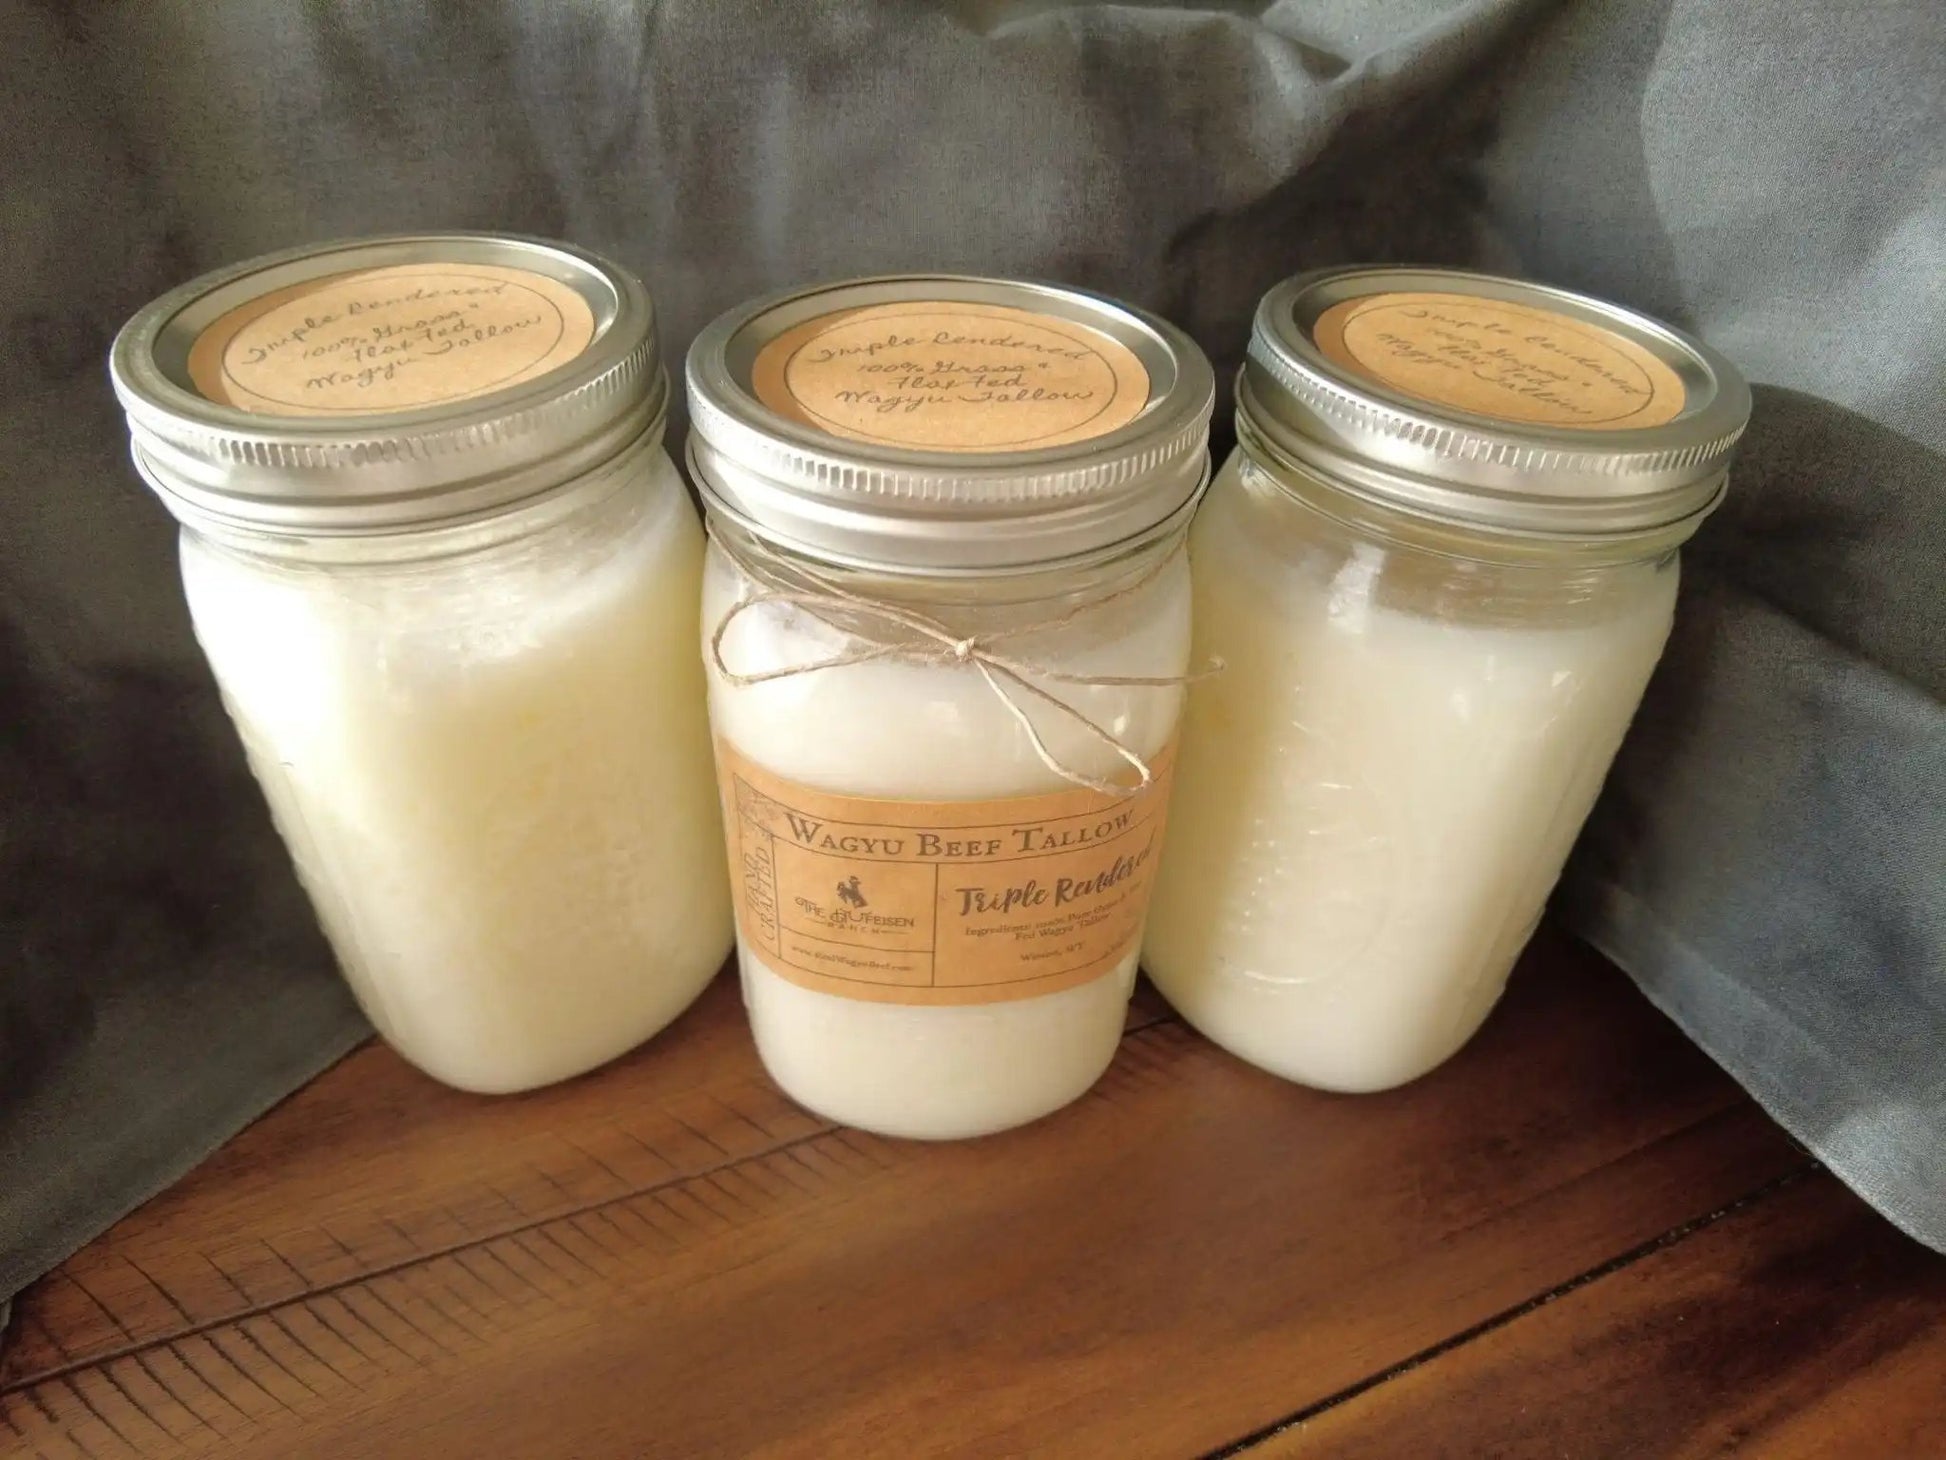 100% All-Natural Triple Rendered Grass-Fed Wagyu Beef Tallow - The Hufeisen-Ranch (WYO Wagyu)